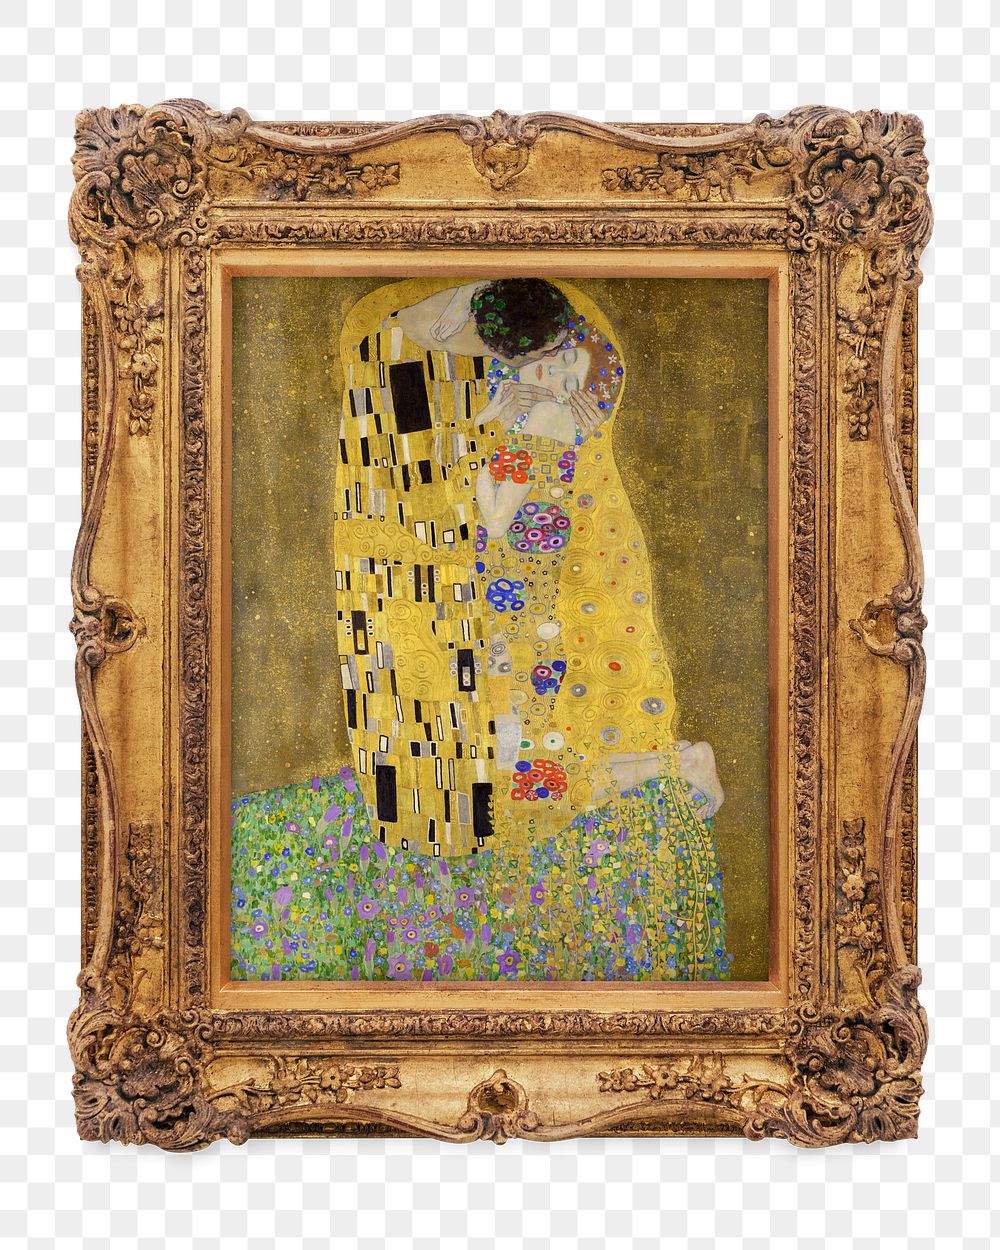 Png Klimt's The Kiss framed artwork, transparent background, remixed by rawpixel.